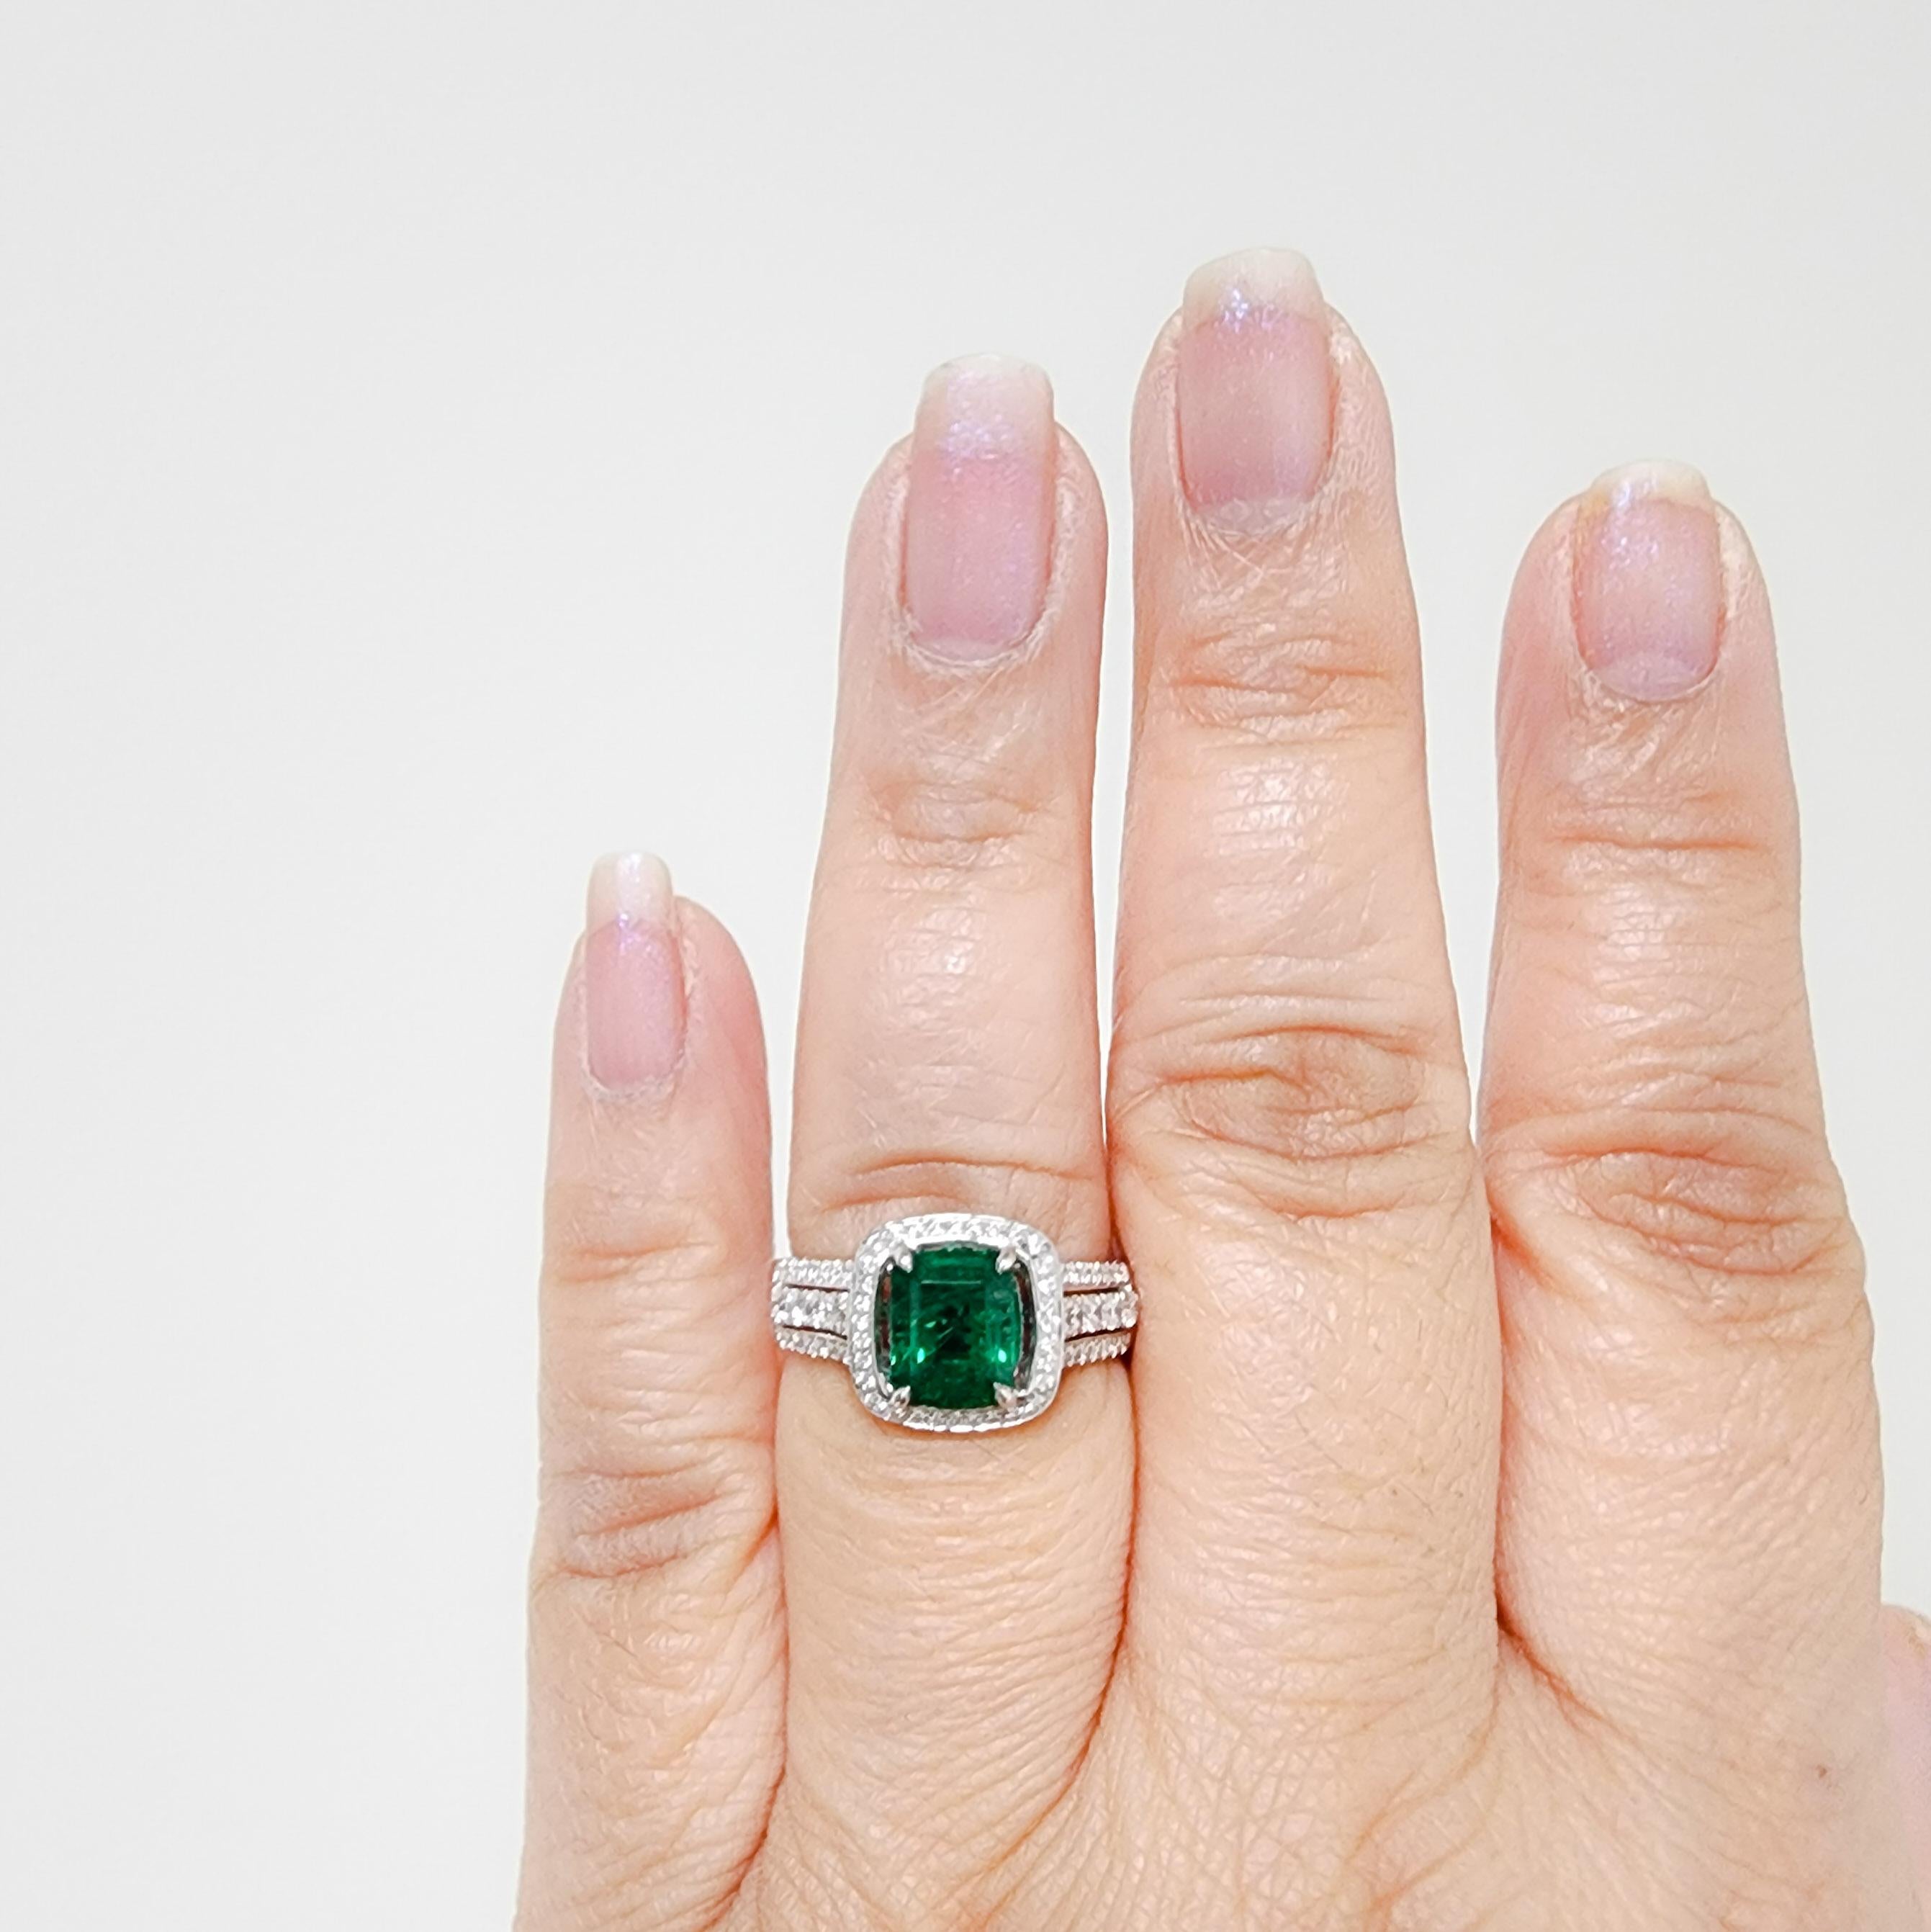 Beautiful 1.93 ct. emerald emerald cut with 0.60 ct. good quality white diamond rounds.  Handmade in 18k white gold by Simon G.  Ring size 8.